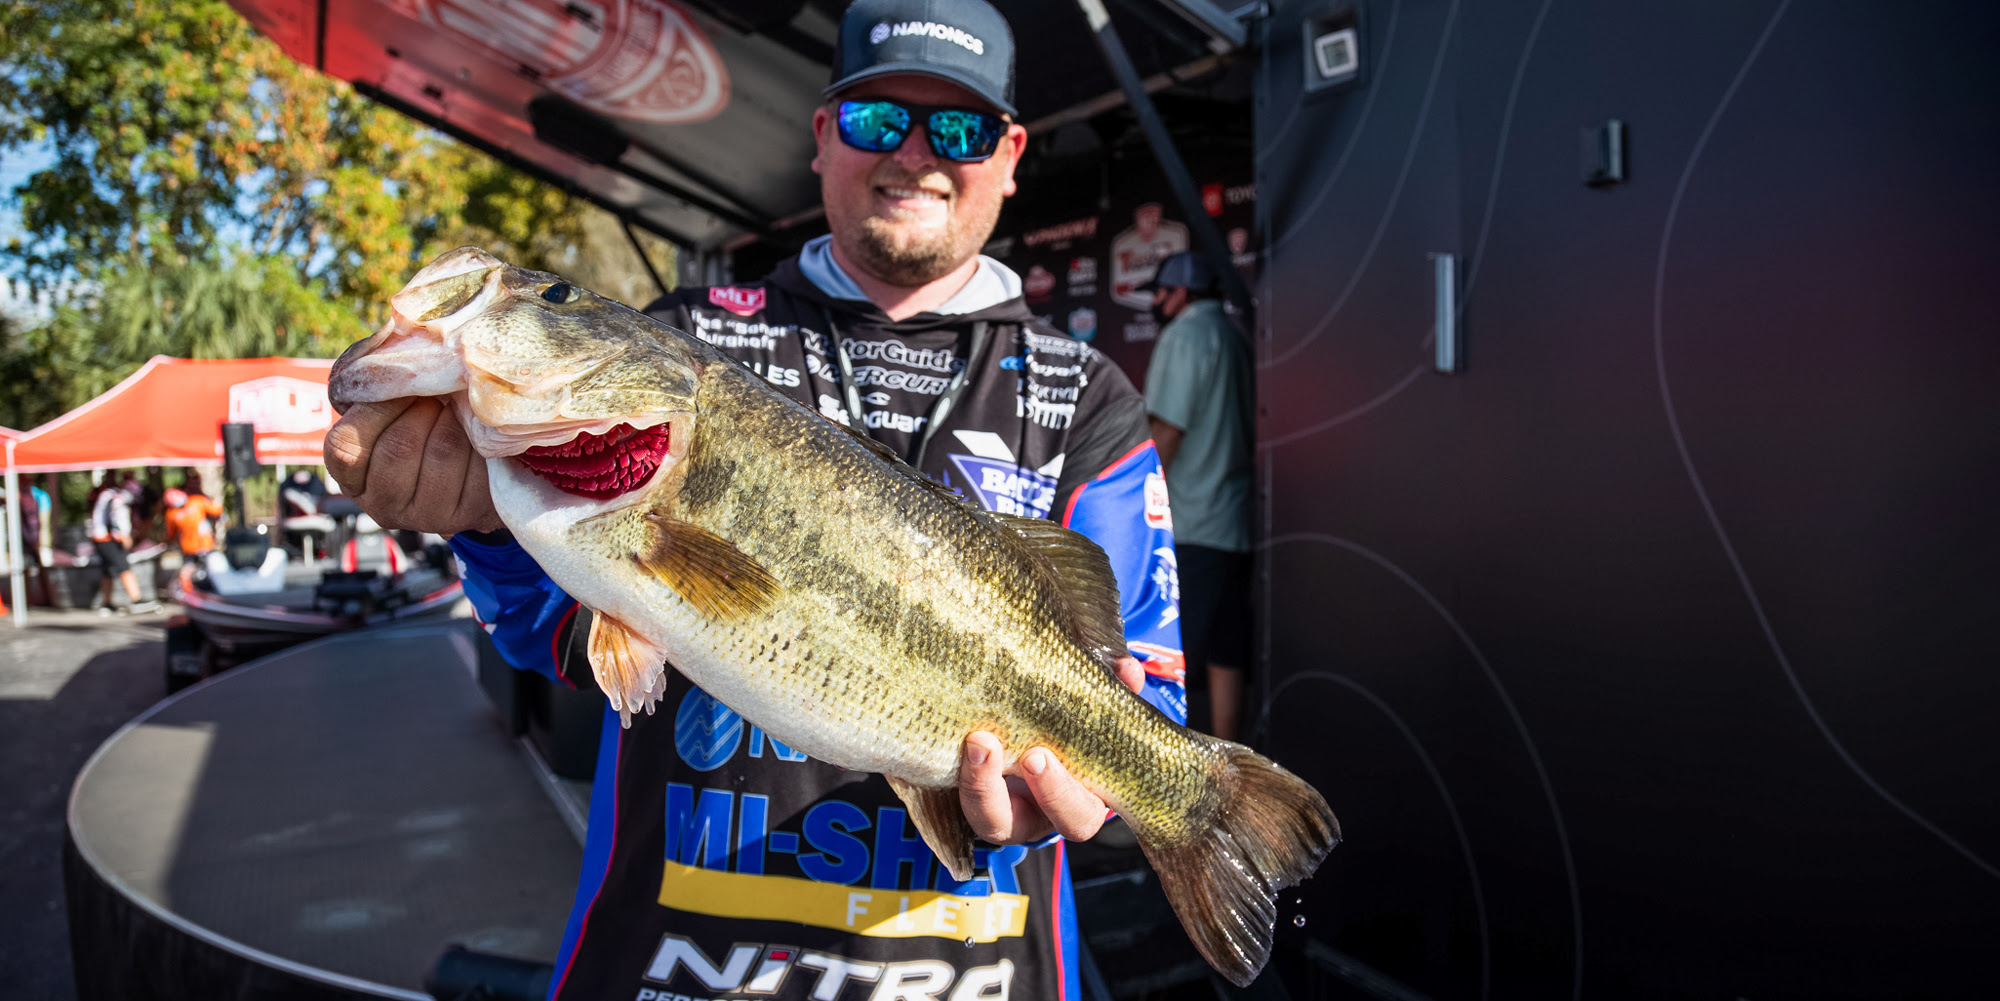 Major League Fishing Bass Pro Tour: Tennessee angler catches 66